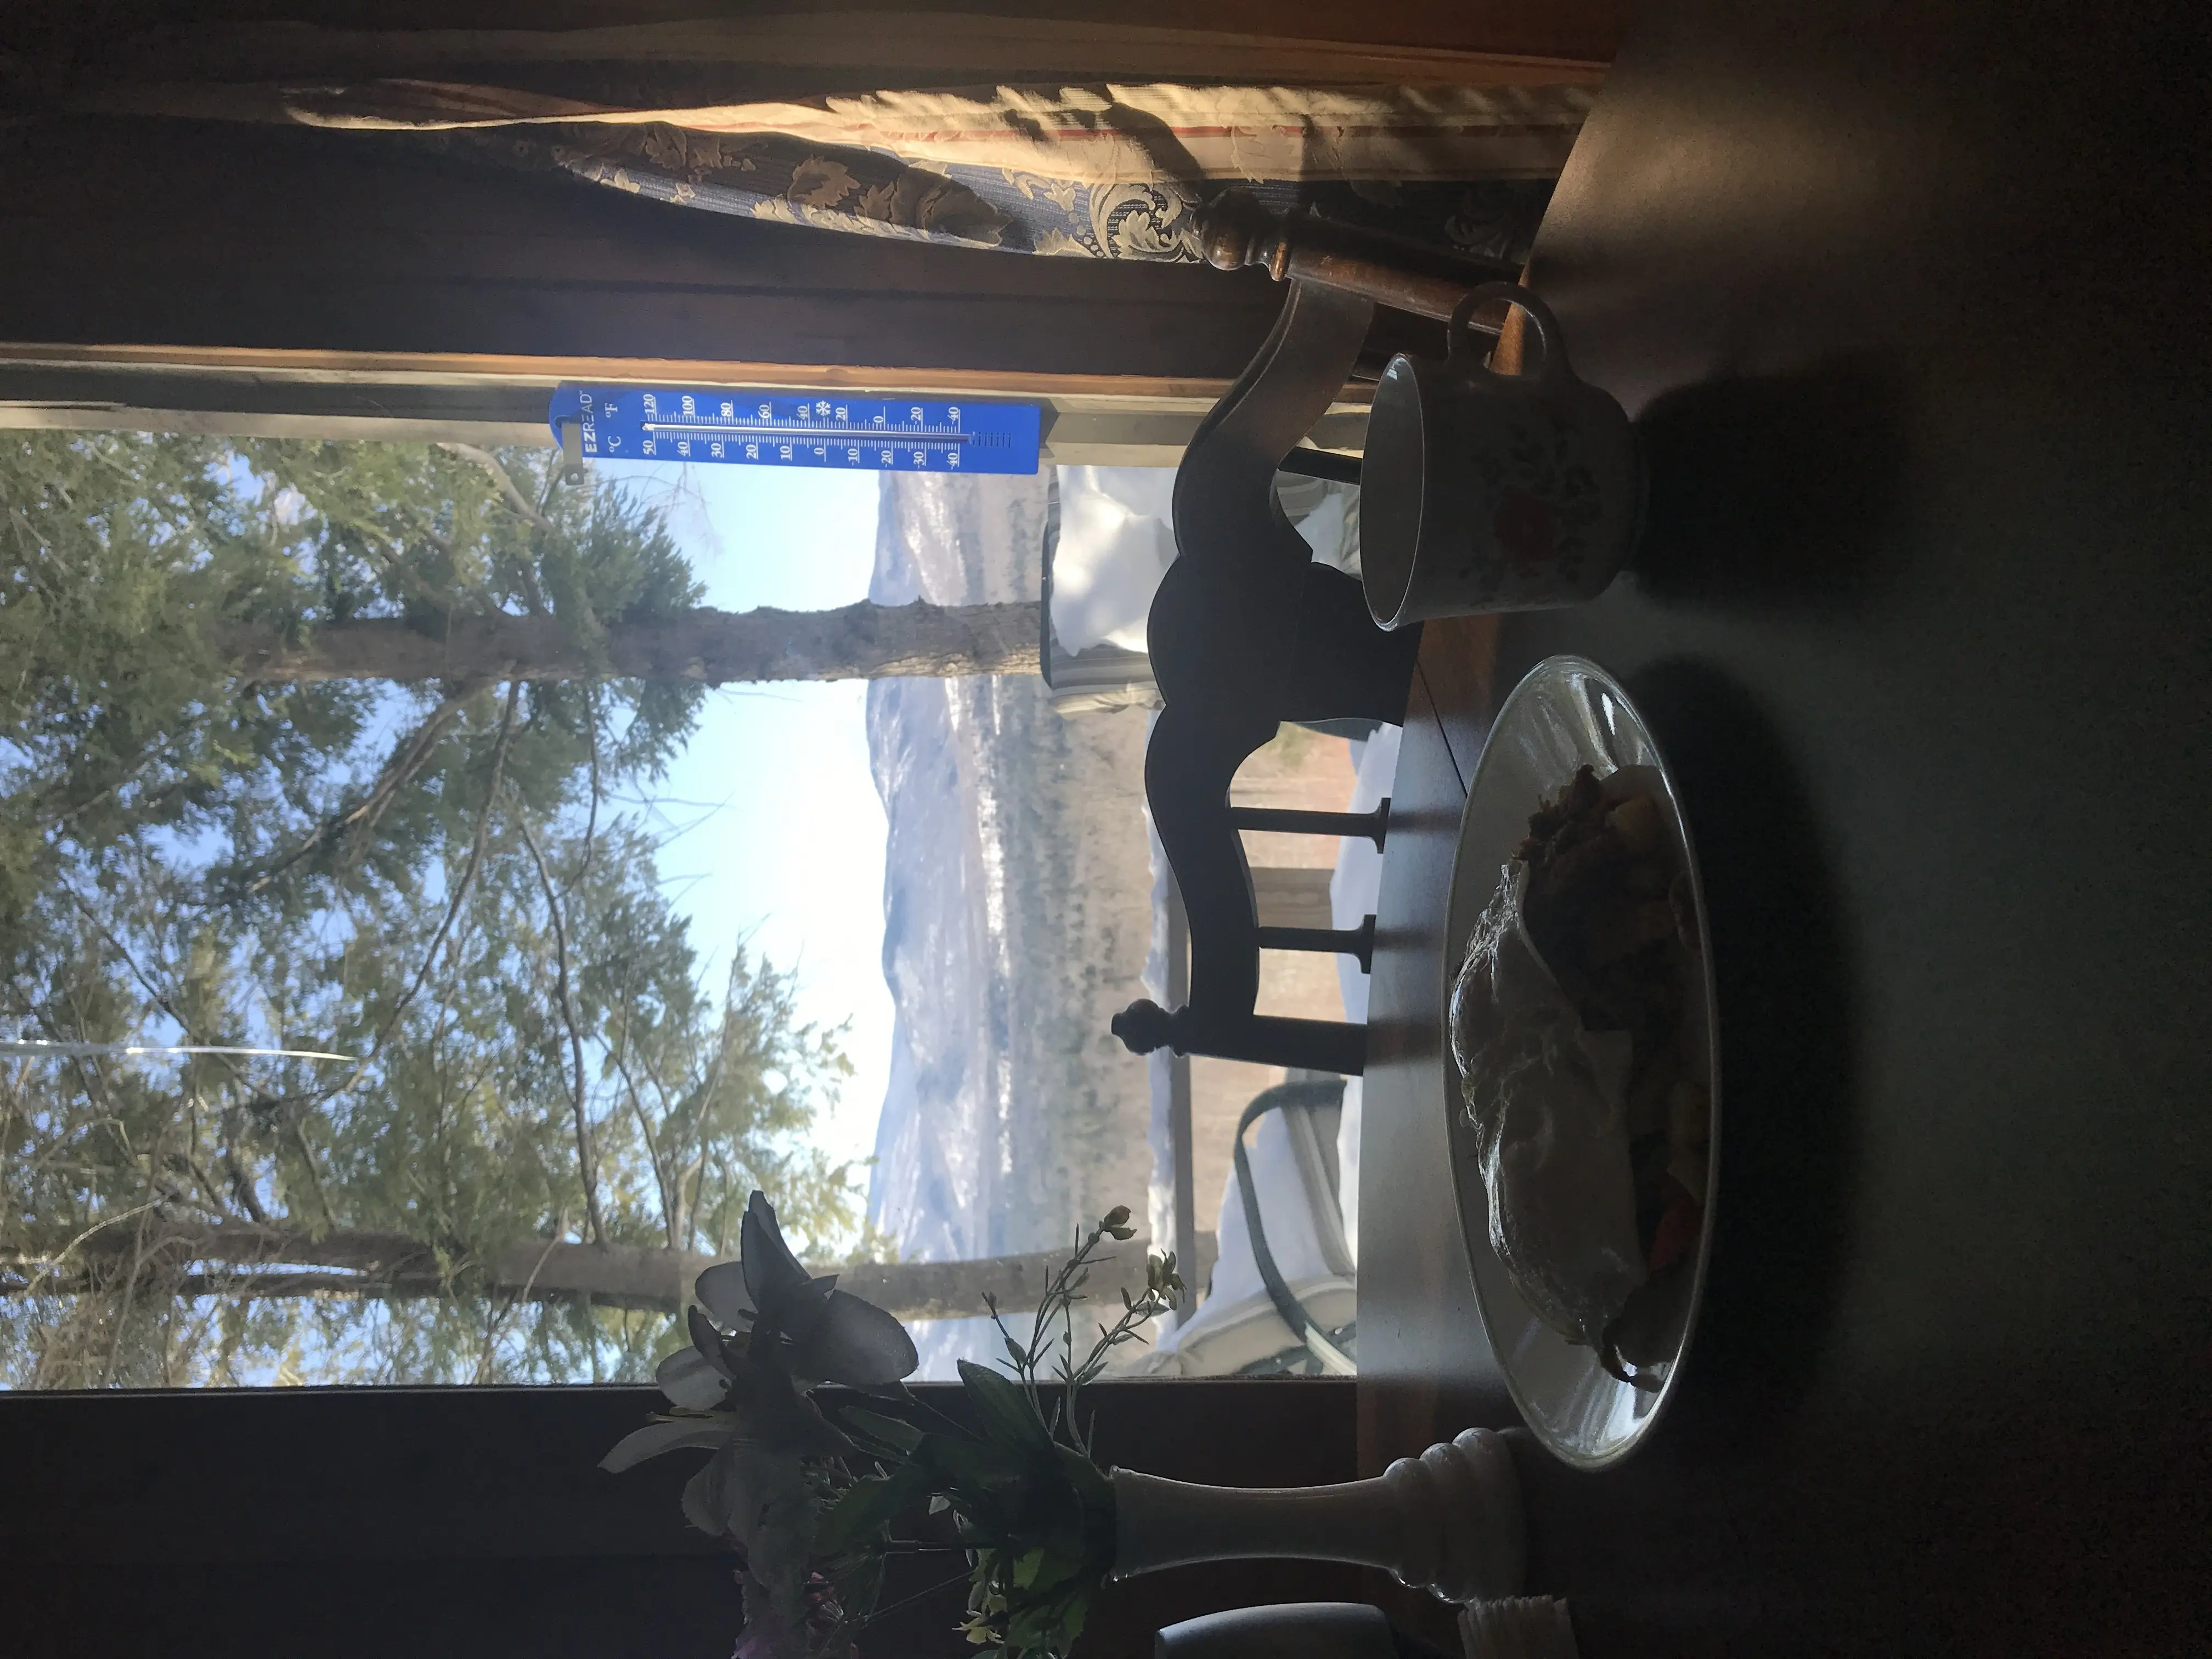 Breakfast on a table that looks out a window to a view of the mountains.